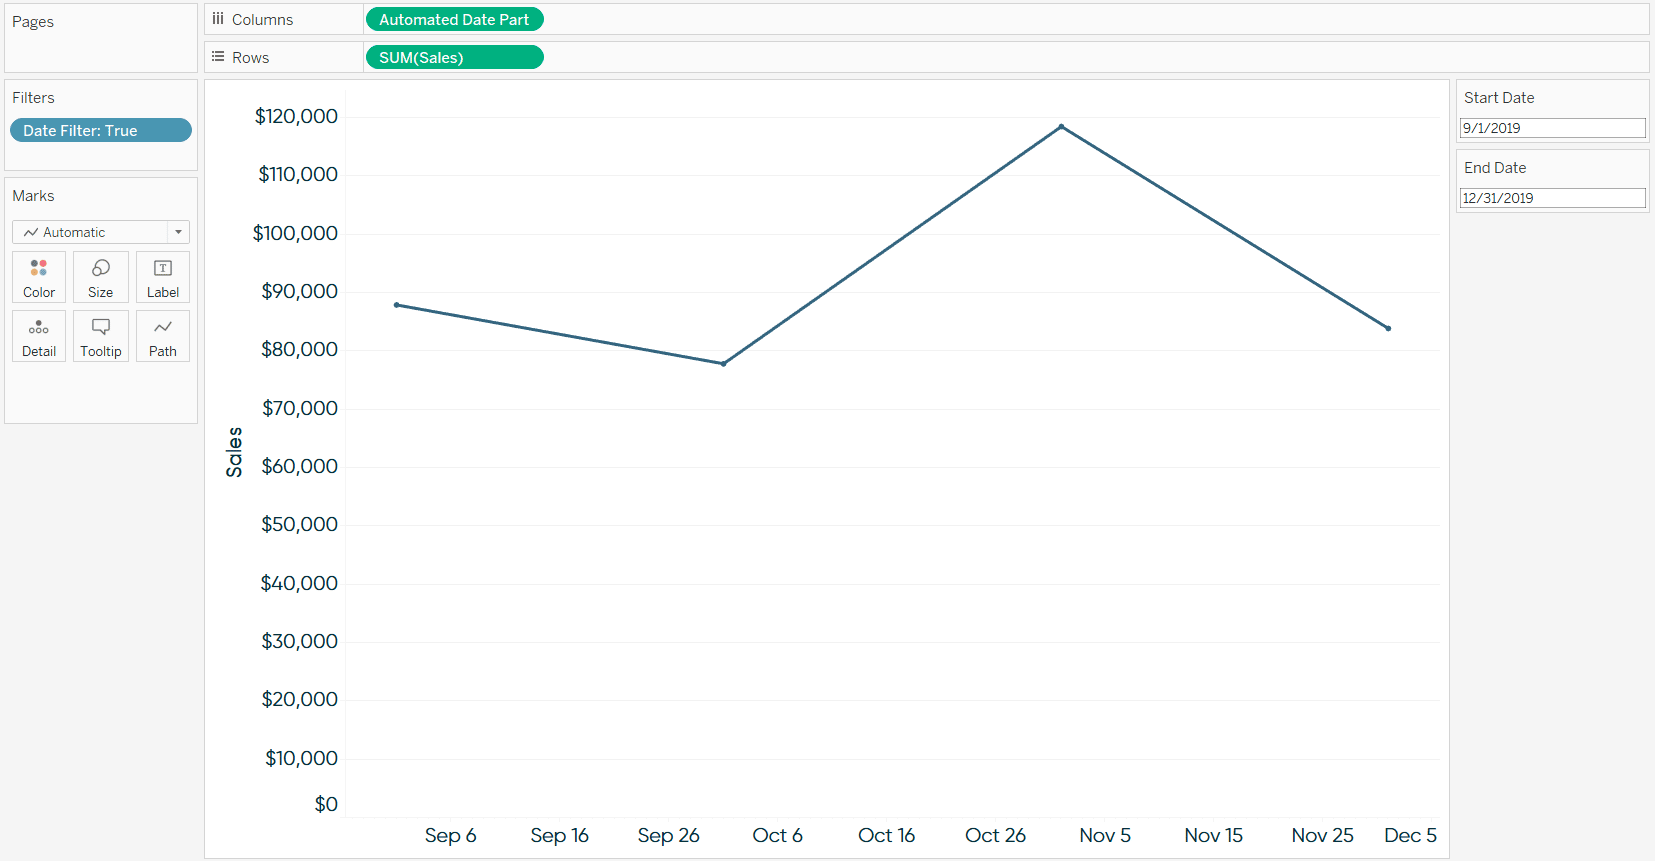 Choose a range greater than 90 days, the line graphs will automatically update to look at months